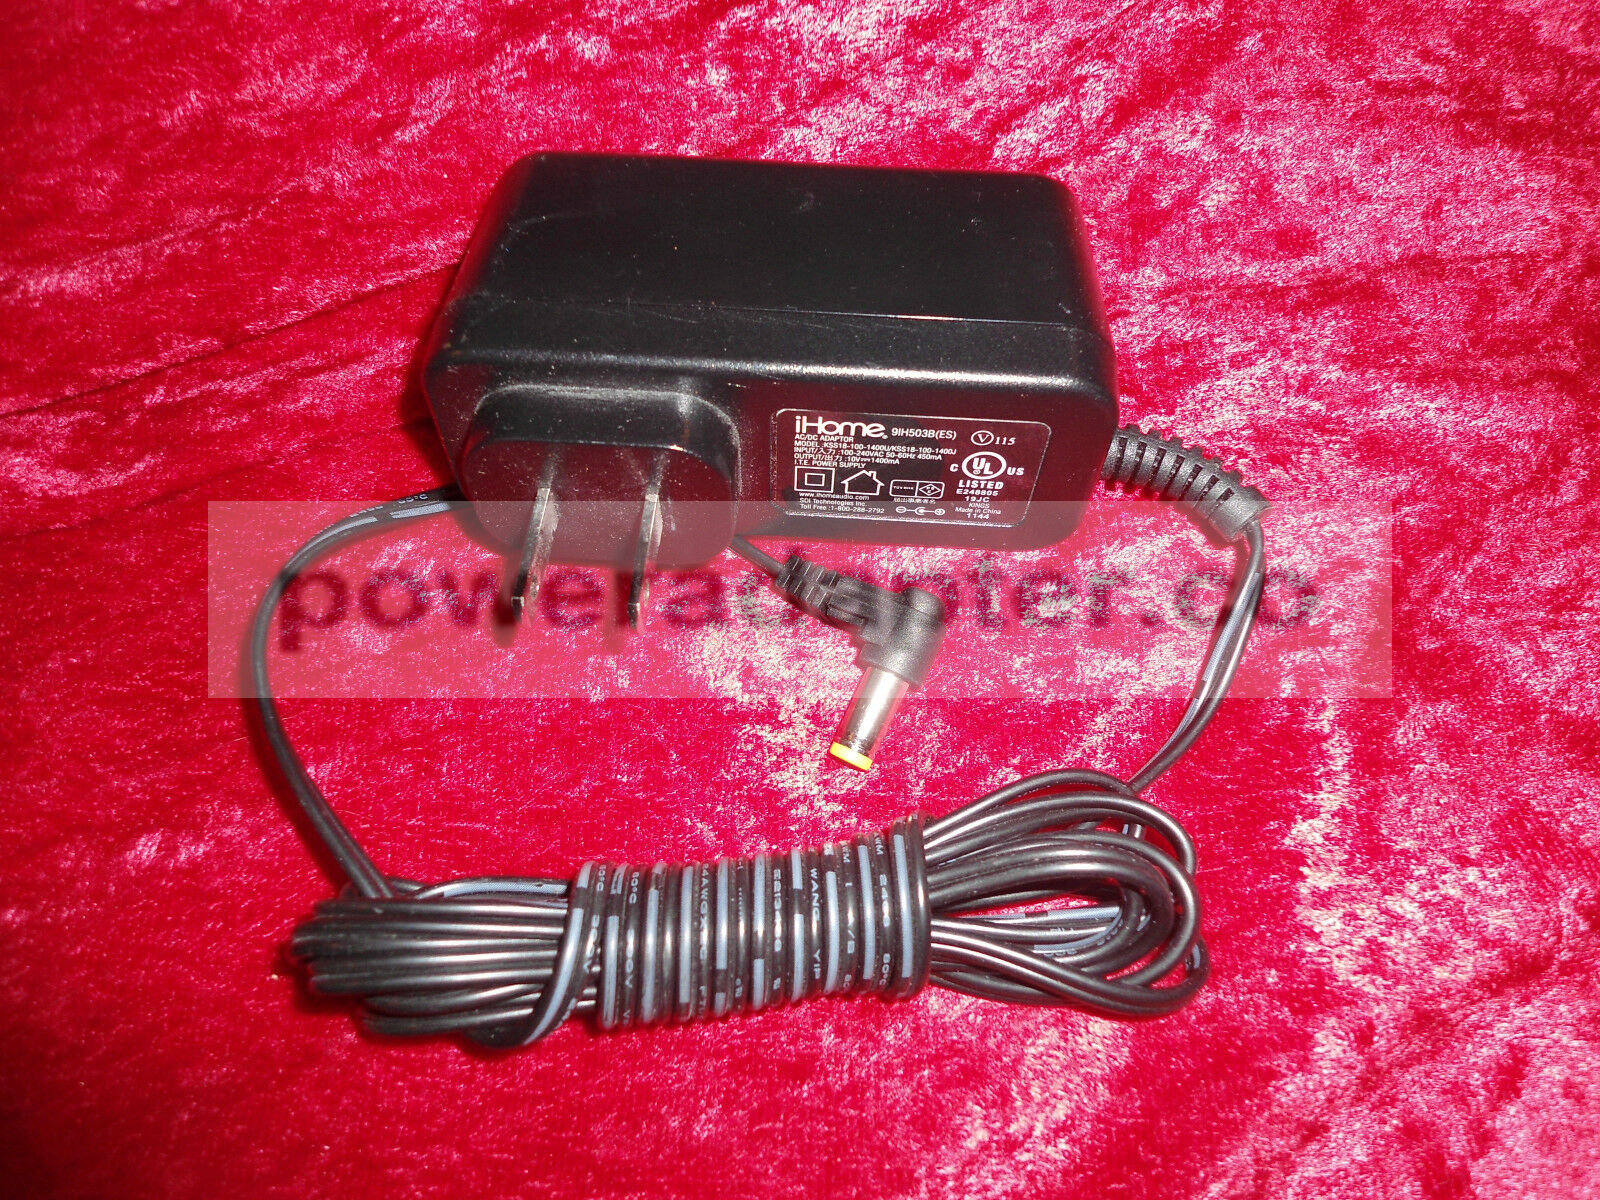 iHome AC/DC Adaptor KSS18-100-1400U 9IH503B(ES) 10V DC 1400mA Power Supply Condition: Used: An item that has been us